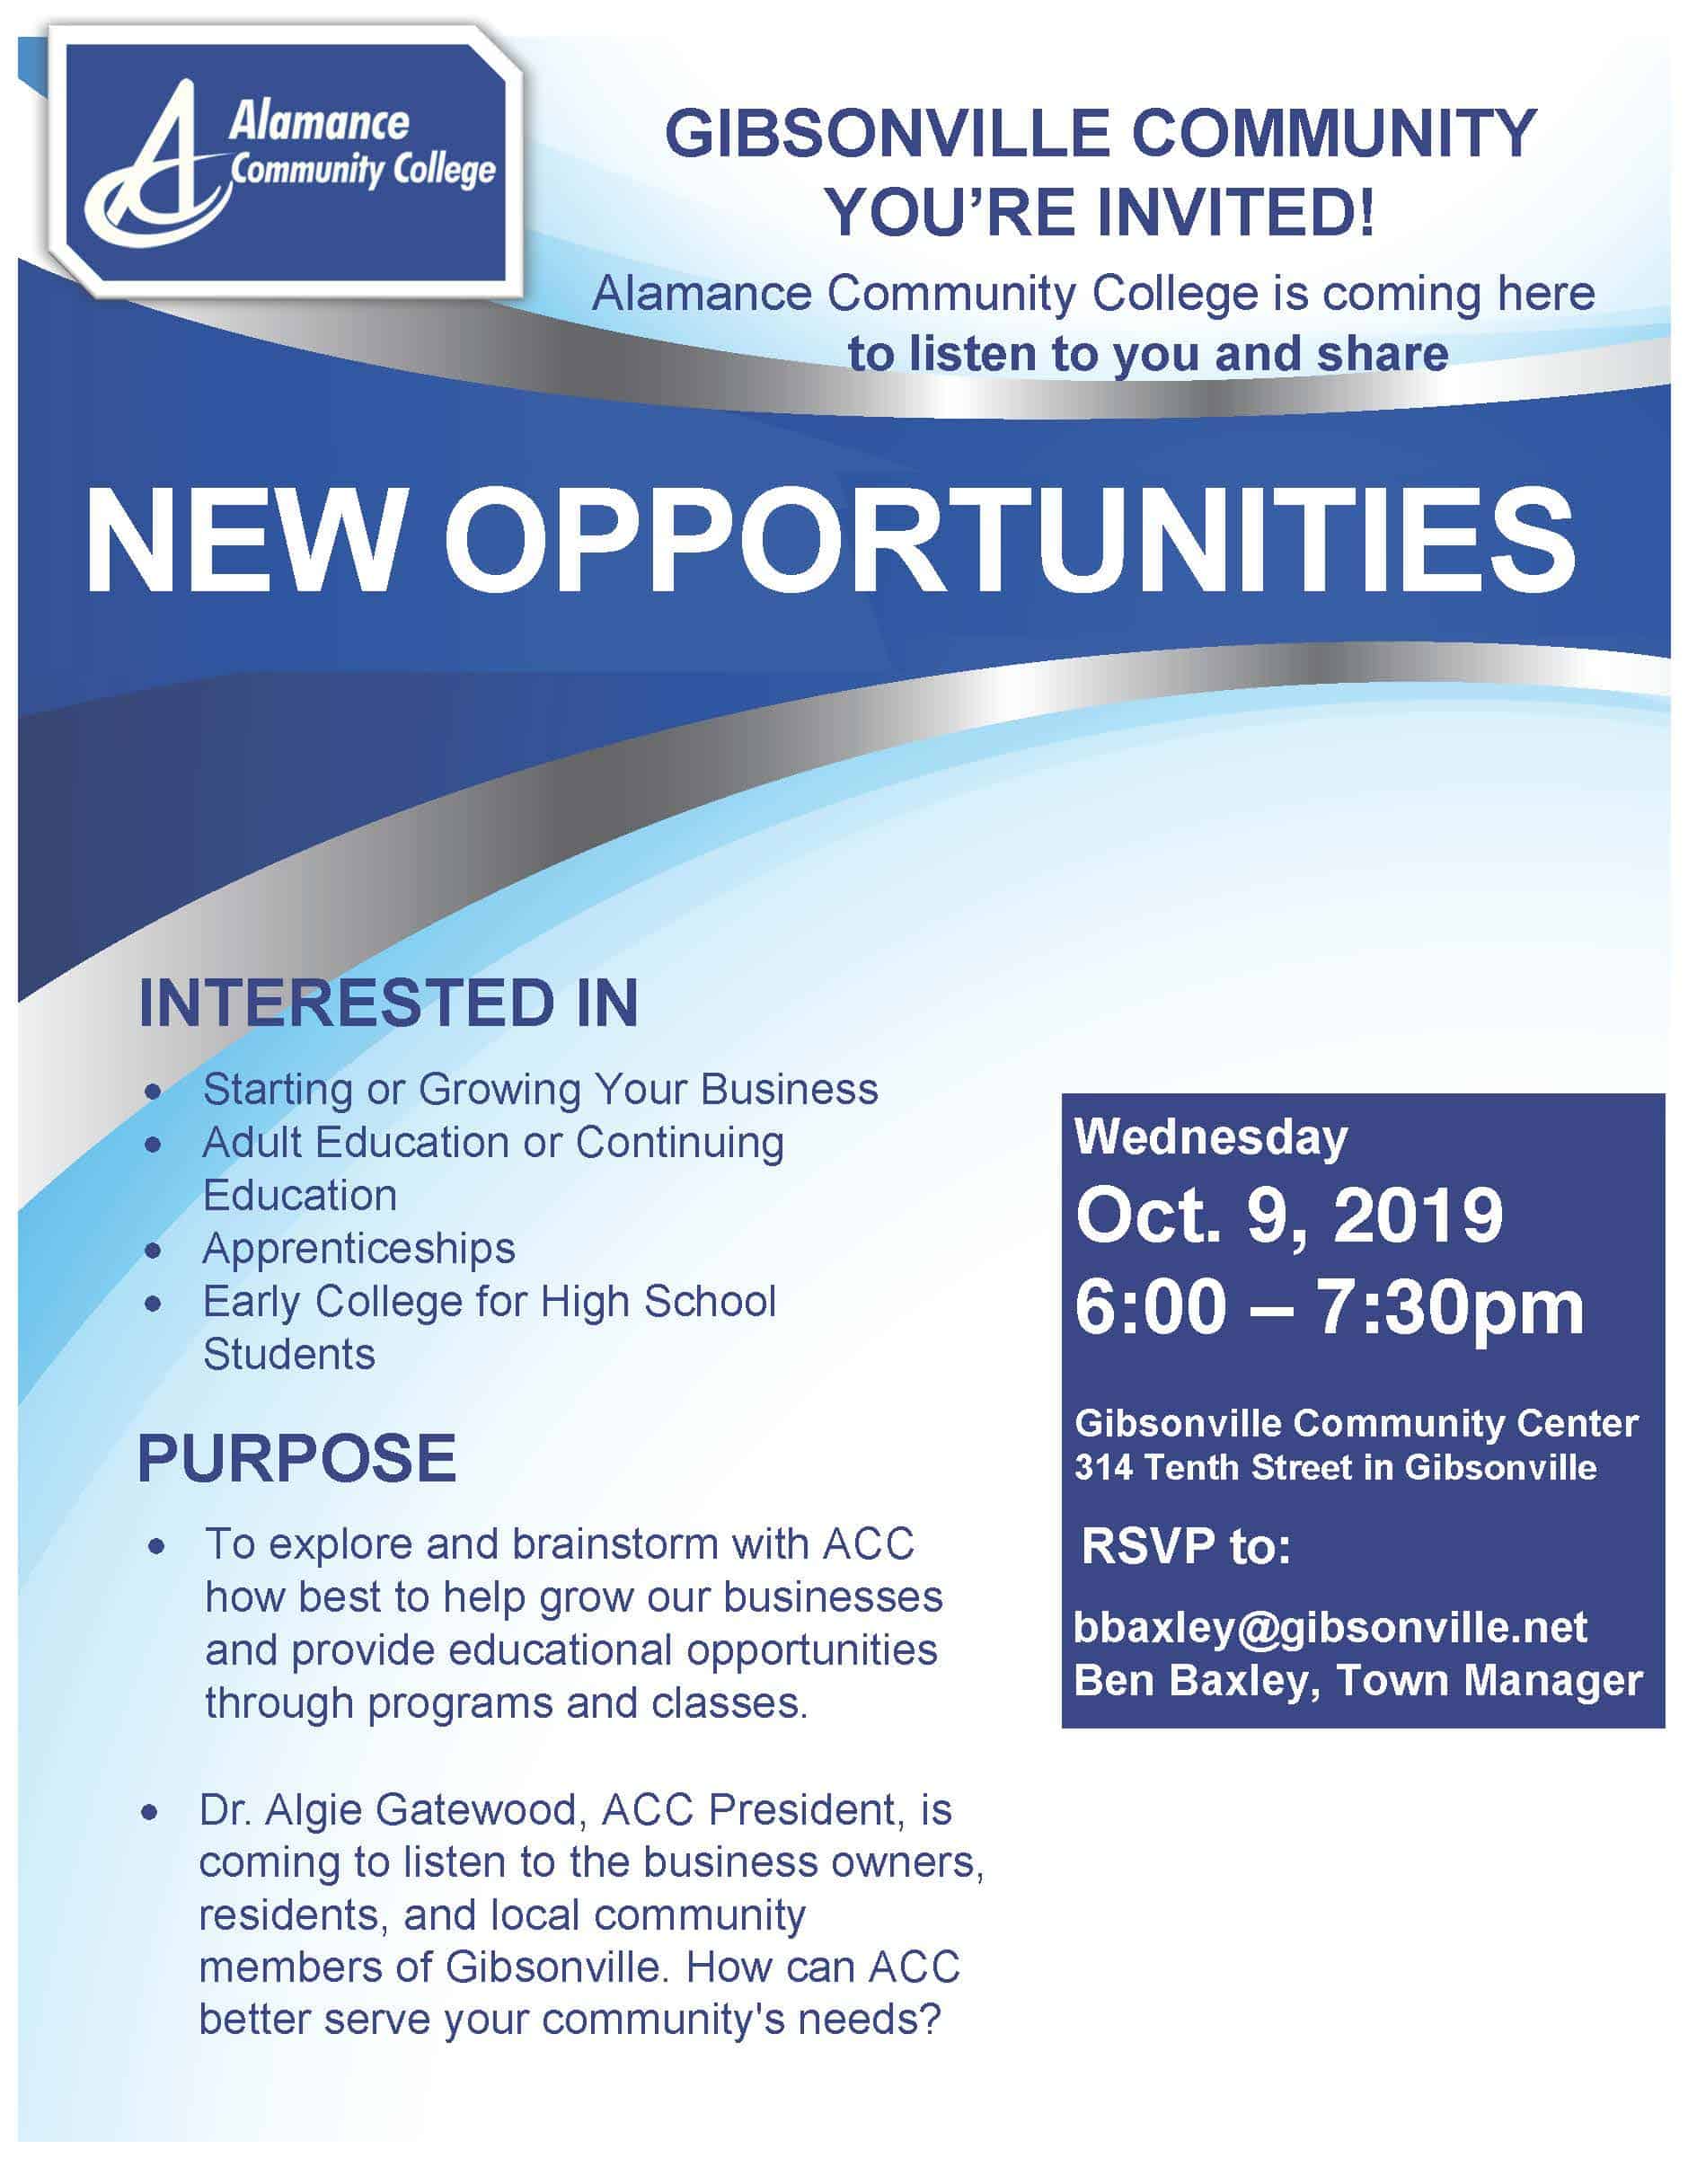 Opportunities with ACC community forum